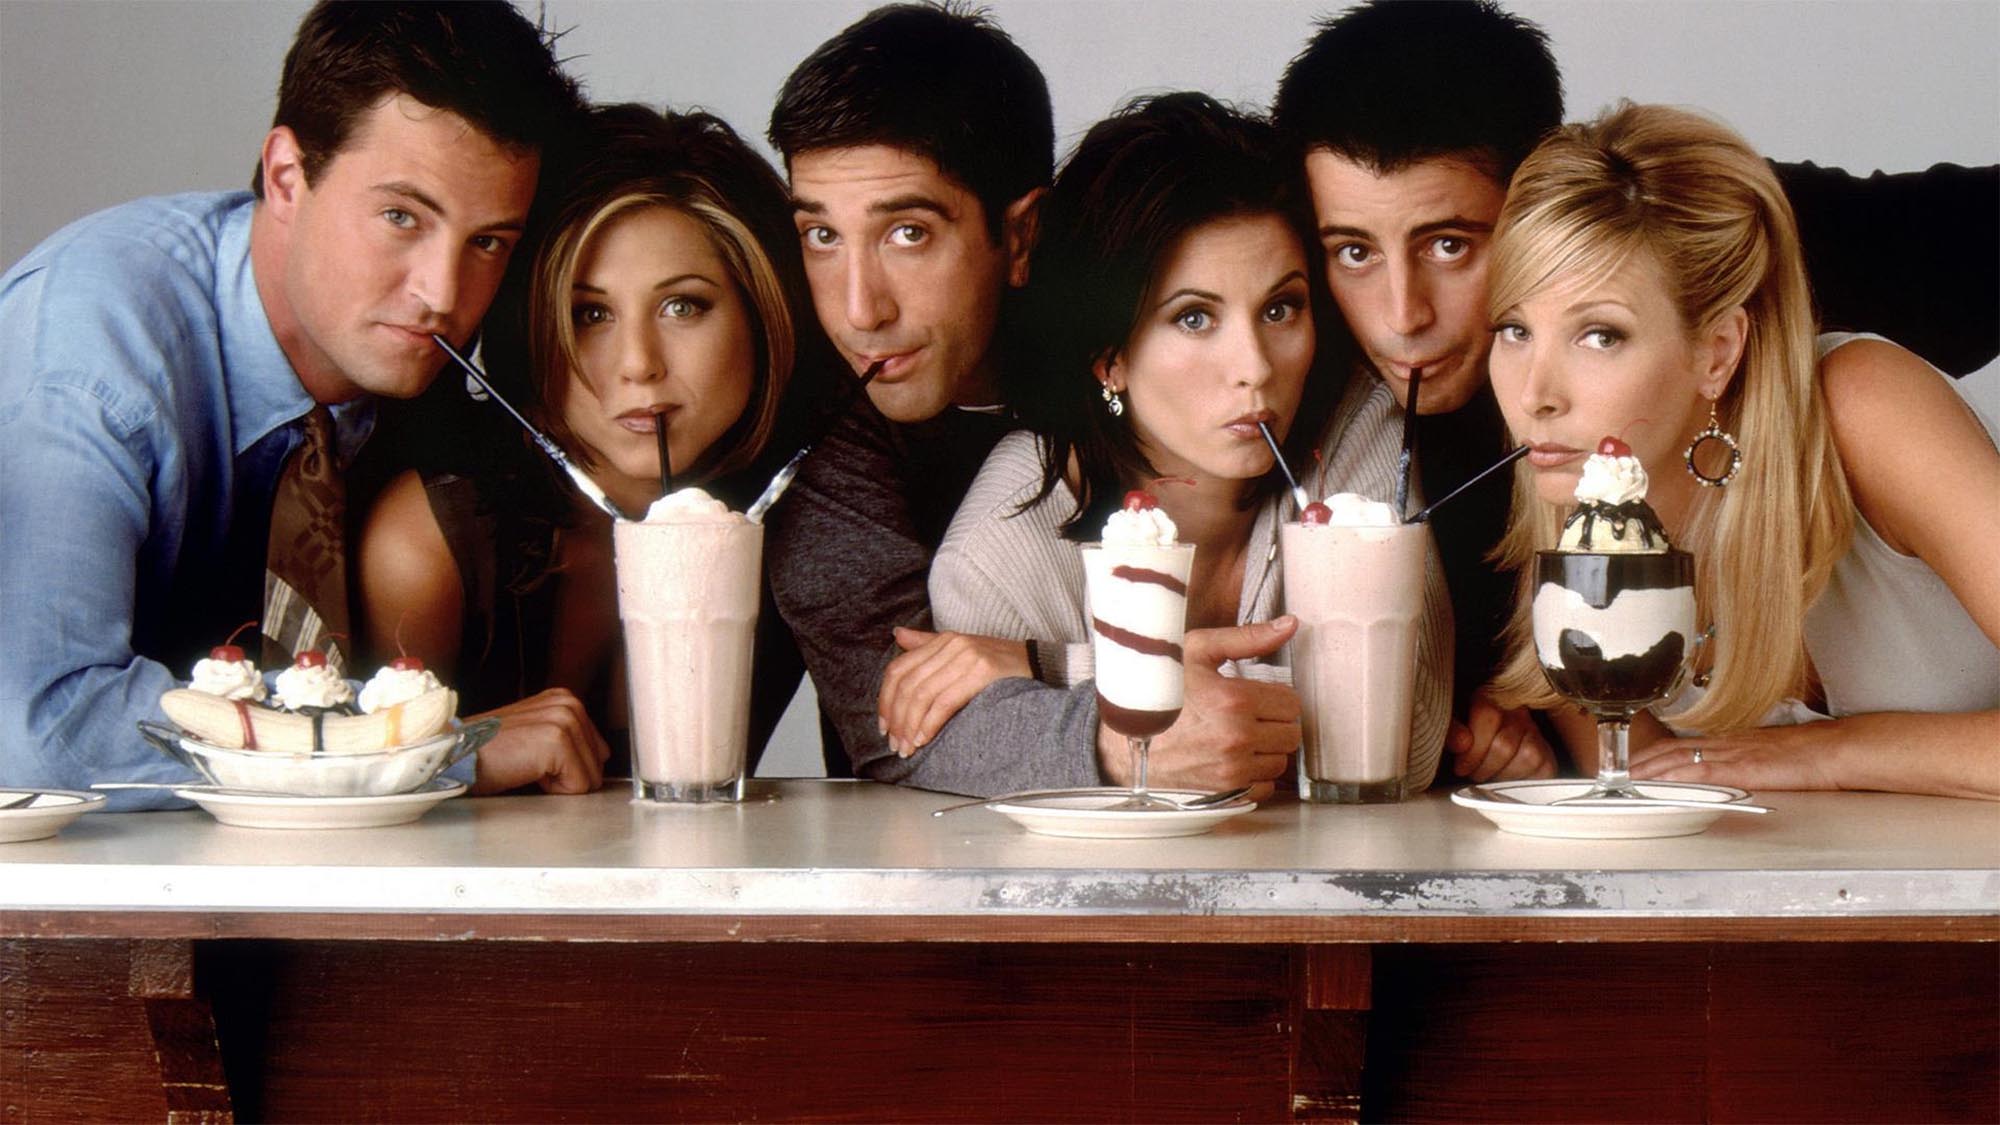 Many sitcoms explore friendships better than 'Friends'. Here’s our ranking of ten sitcoms that do friendship funnier than 'Friends' ever did.